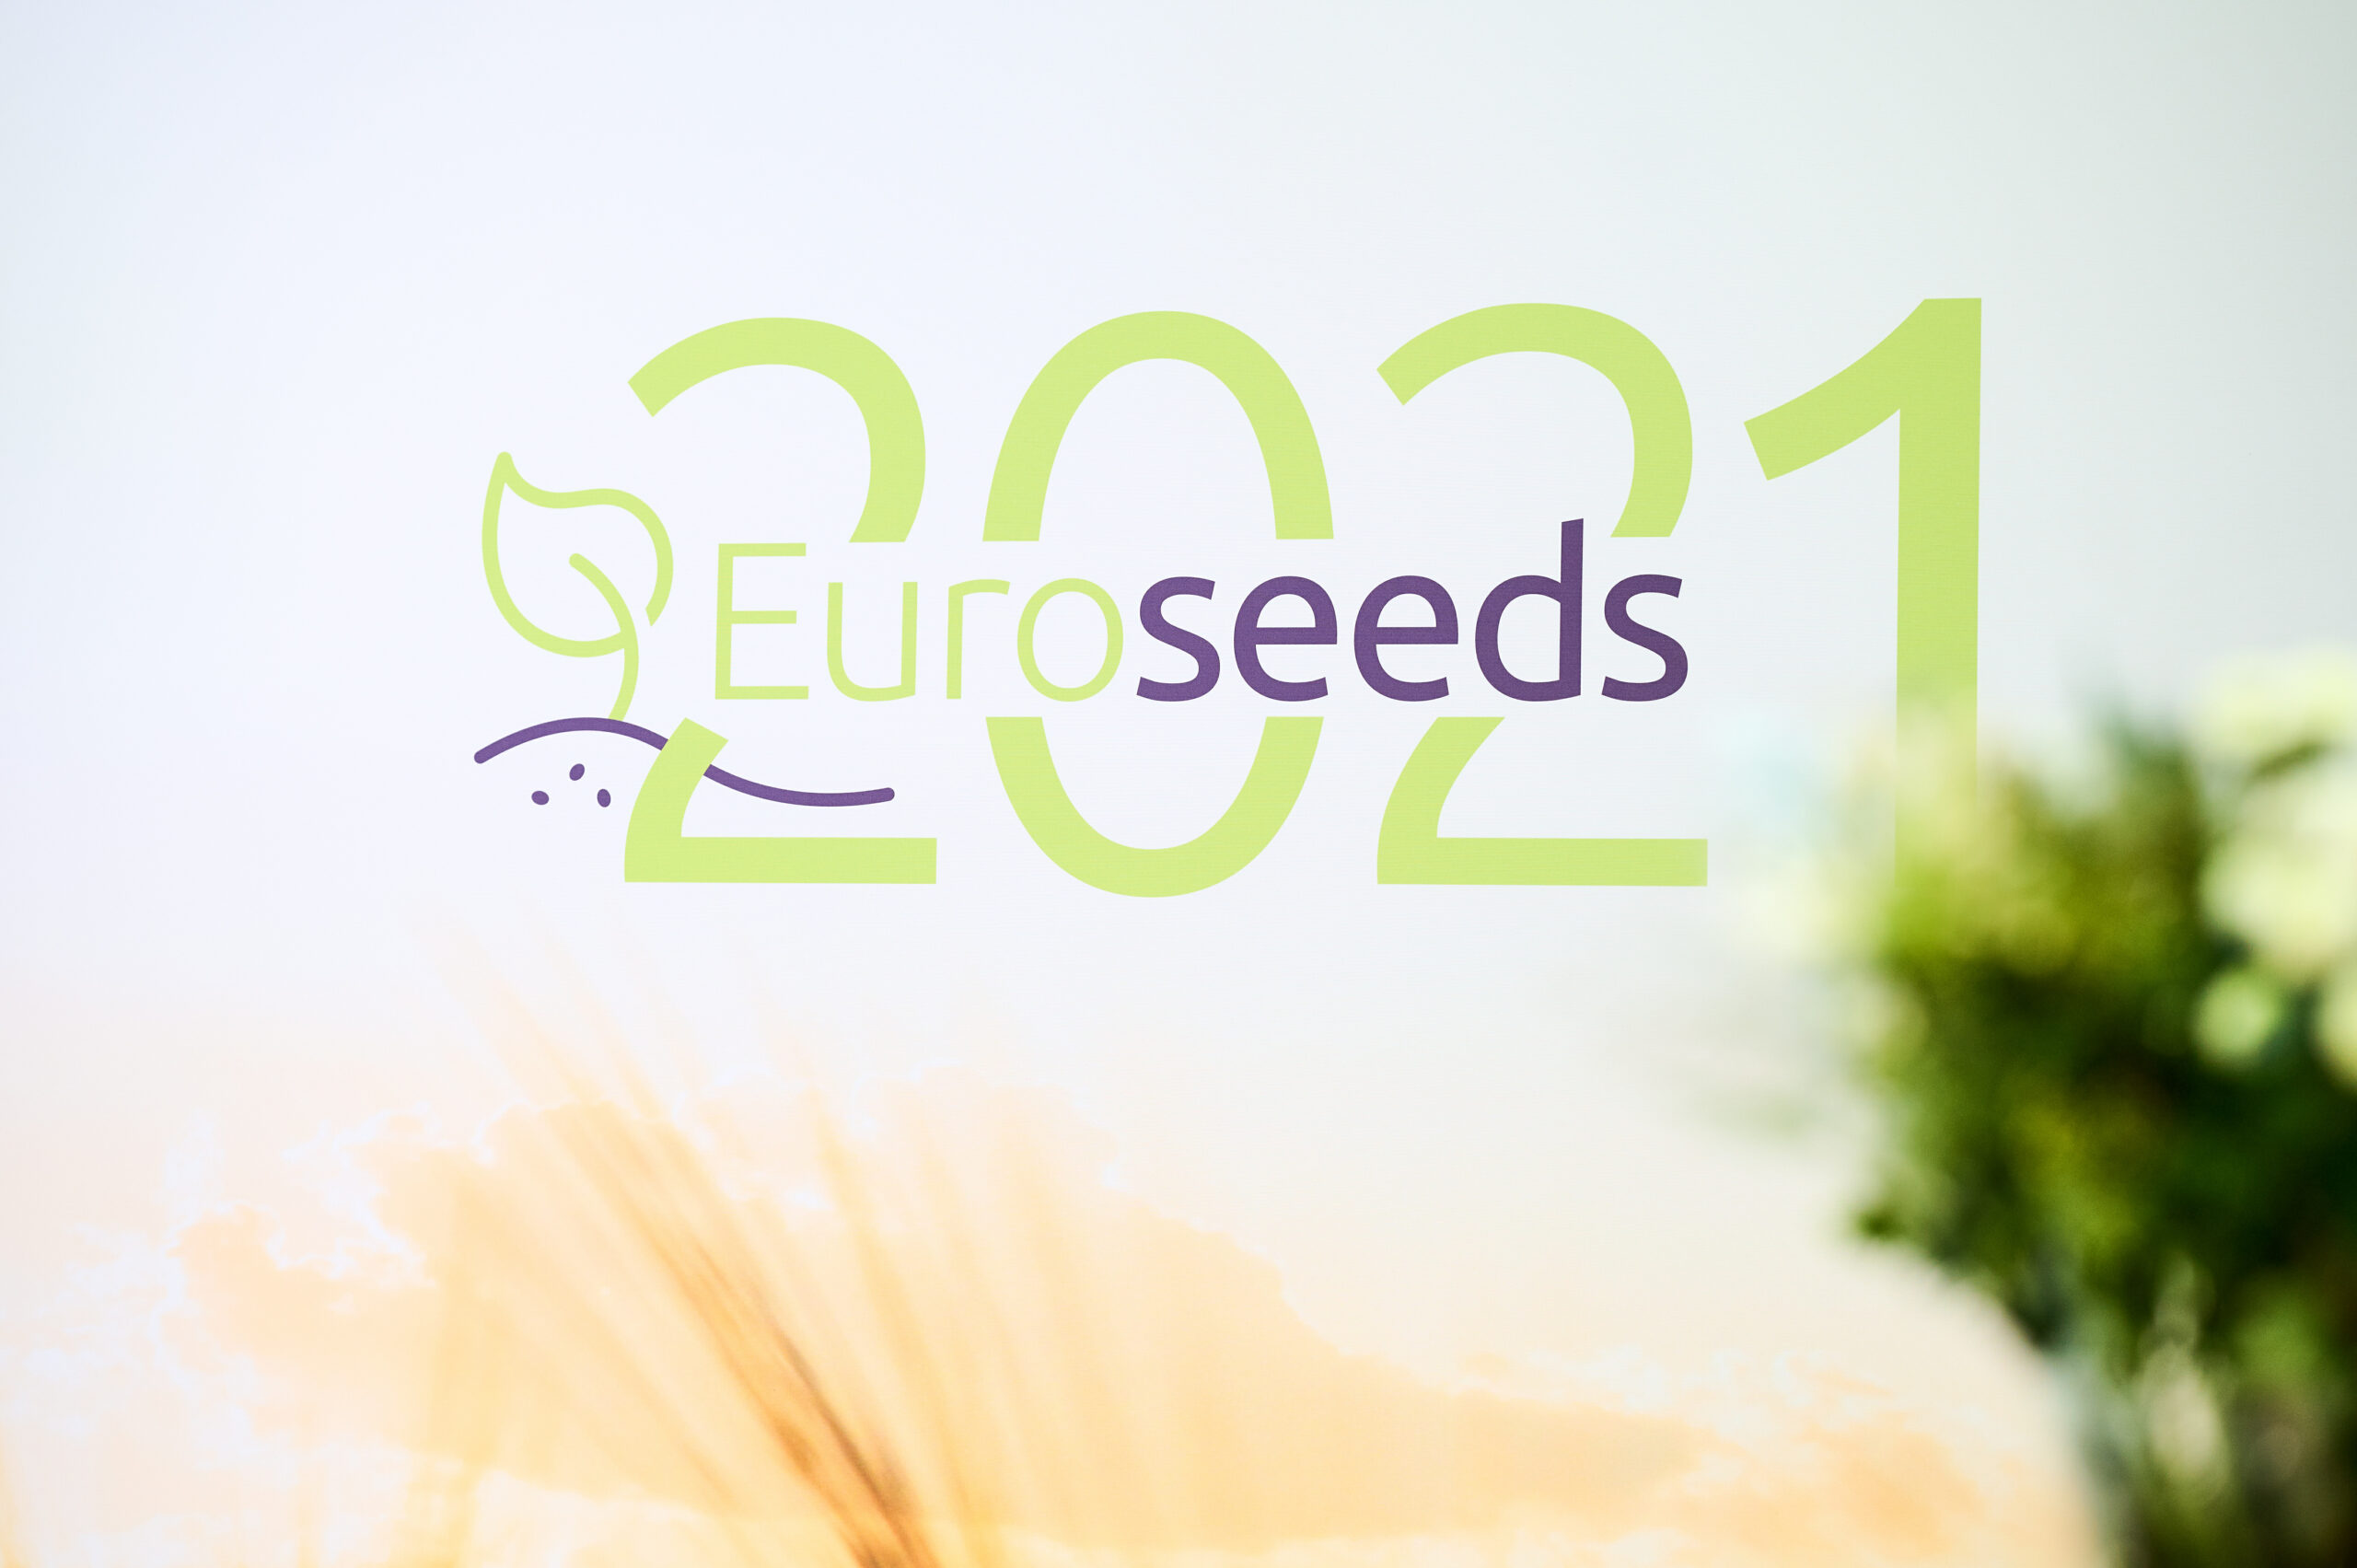 Euroseeds 2021 Congress: The First Major Event Of The European and……